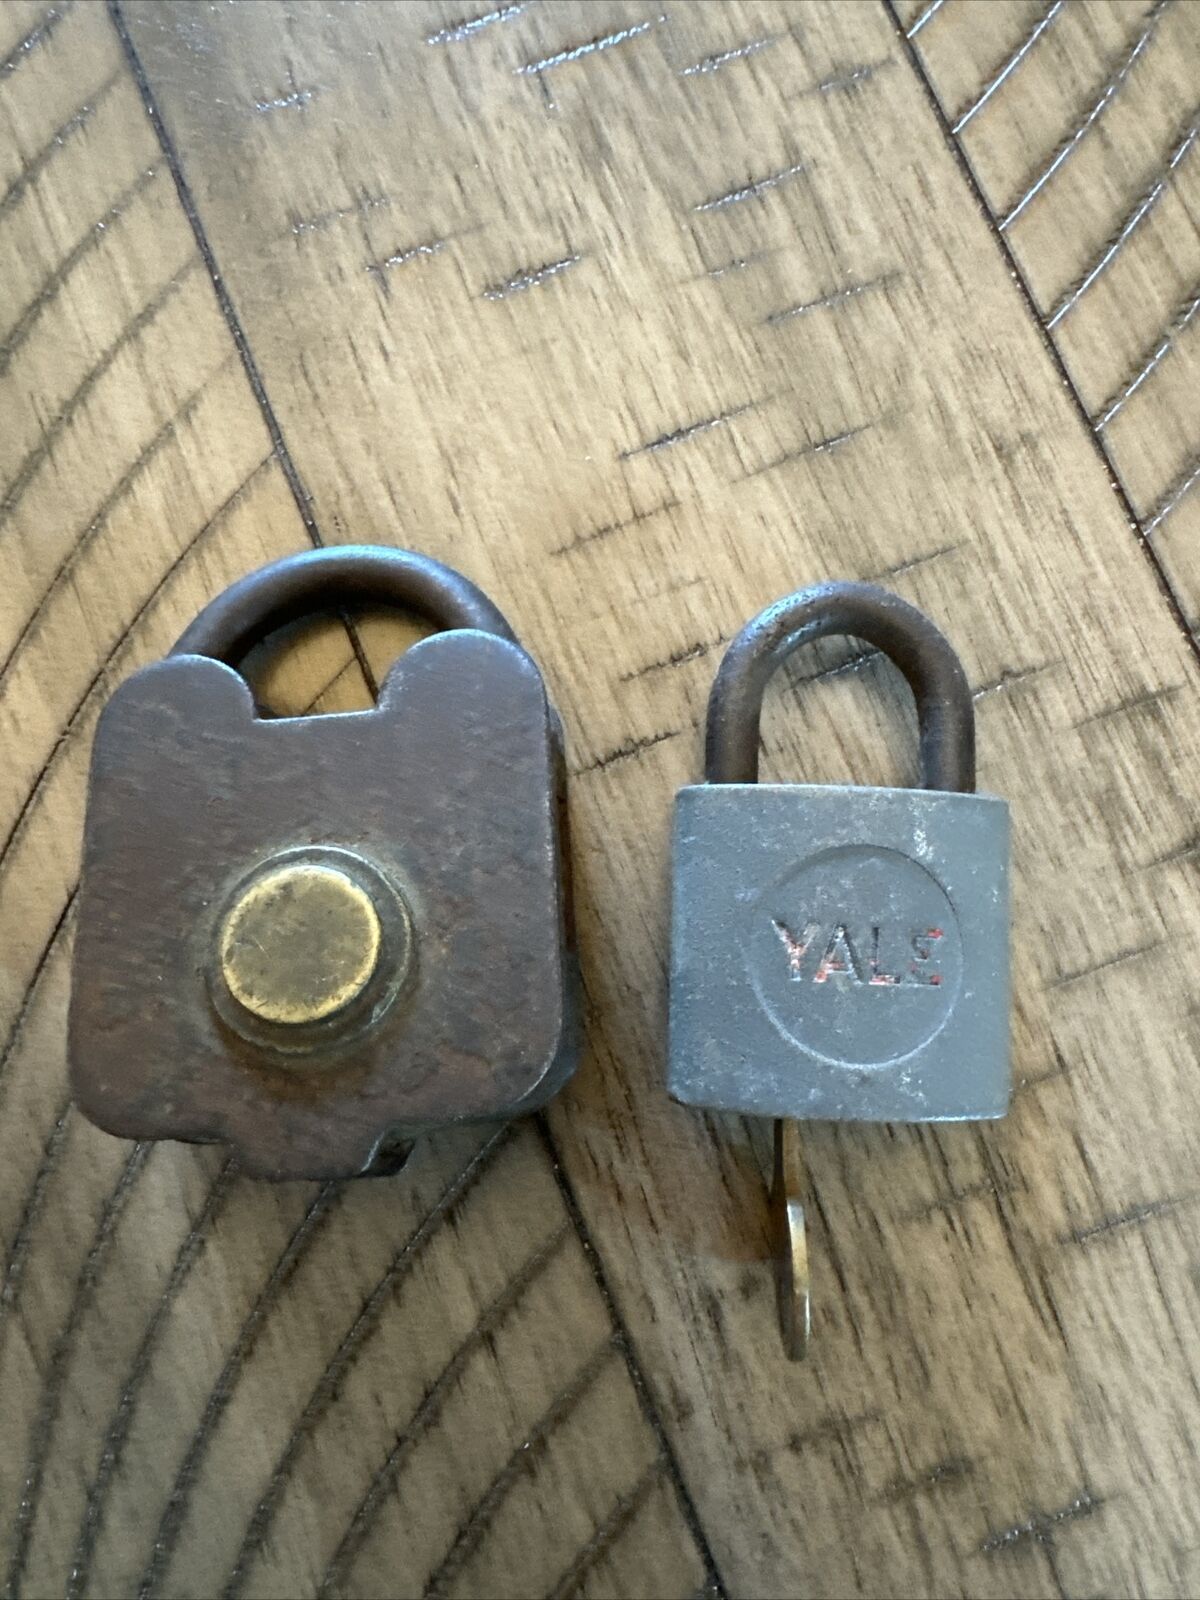 ANTIQUE IRON PADLOCK No Markings No Key Also A Vintage Yale Lock With Key